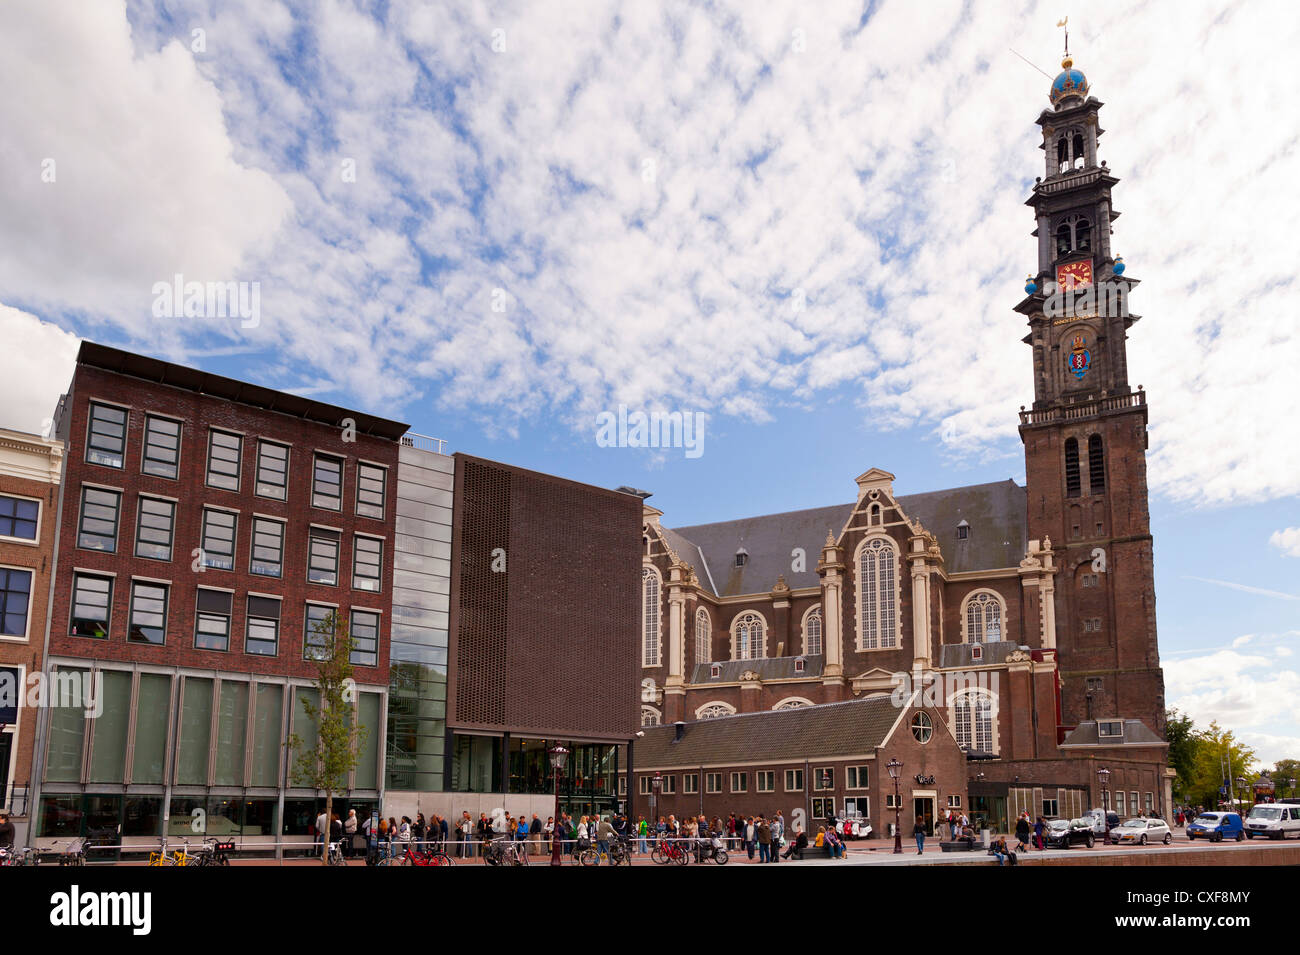 Amsterdam: Dutch reform church with the Anne Frank house in the foreground - Amsterdam, Netherlands, Europe Stock Photo